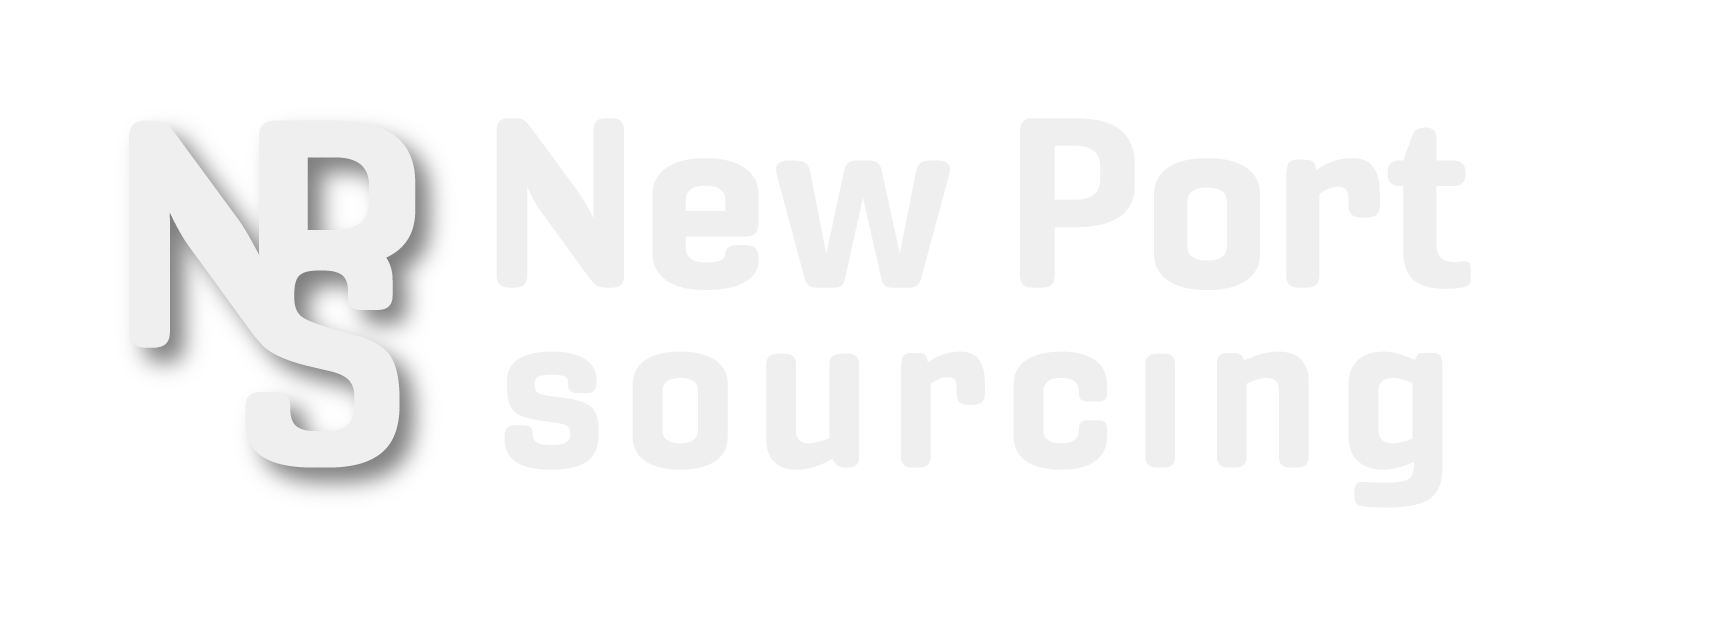 New Port Sourcing